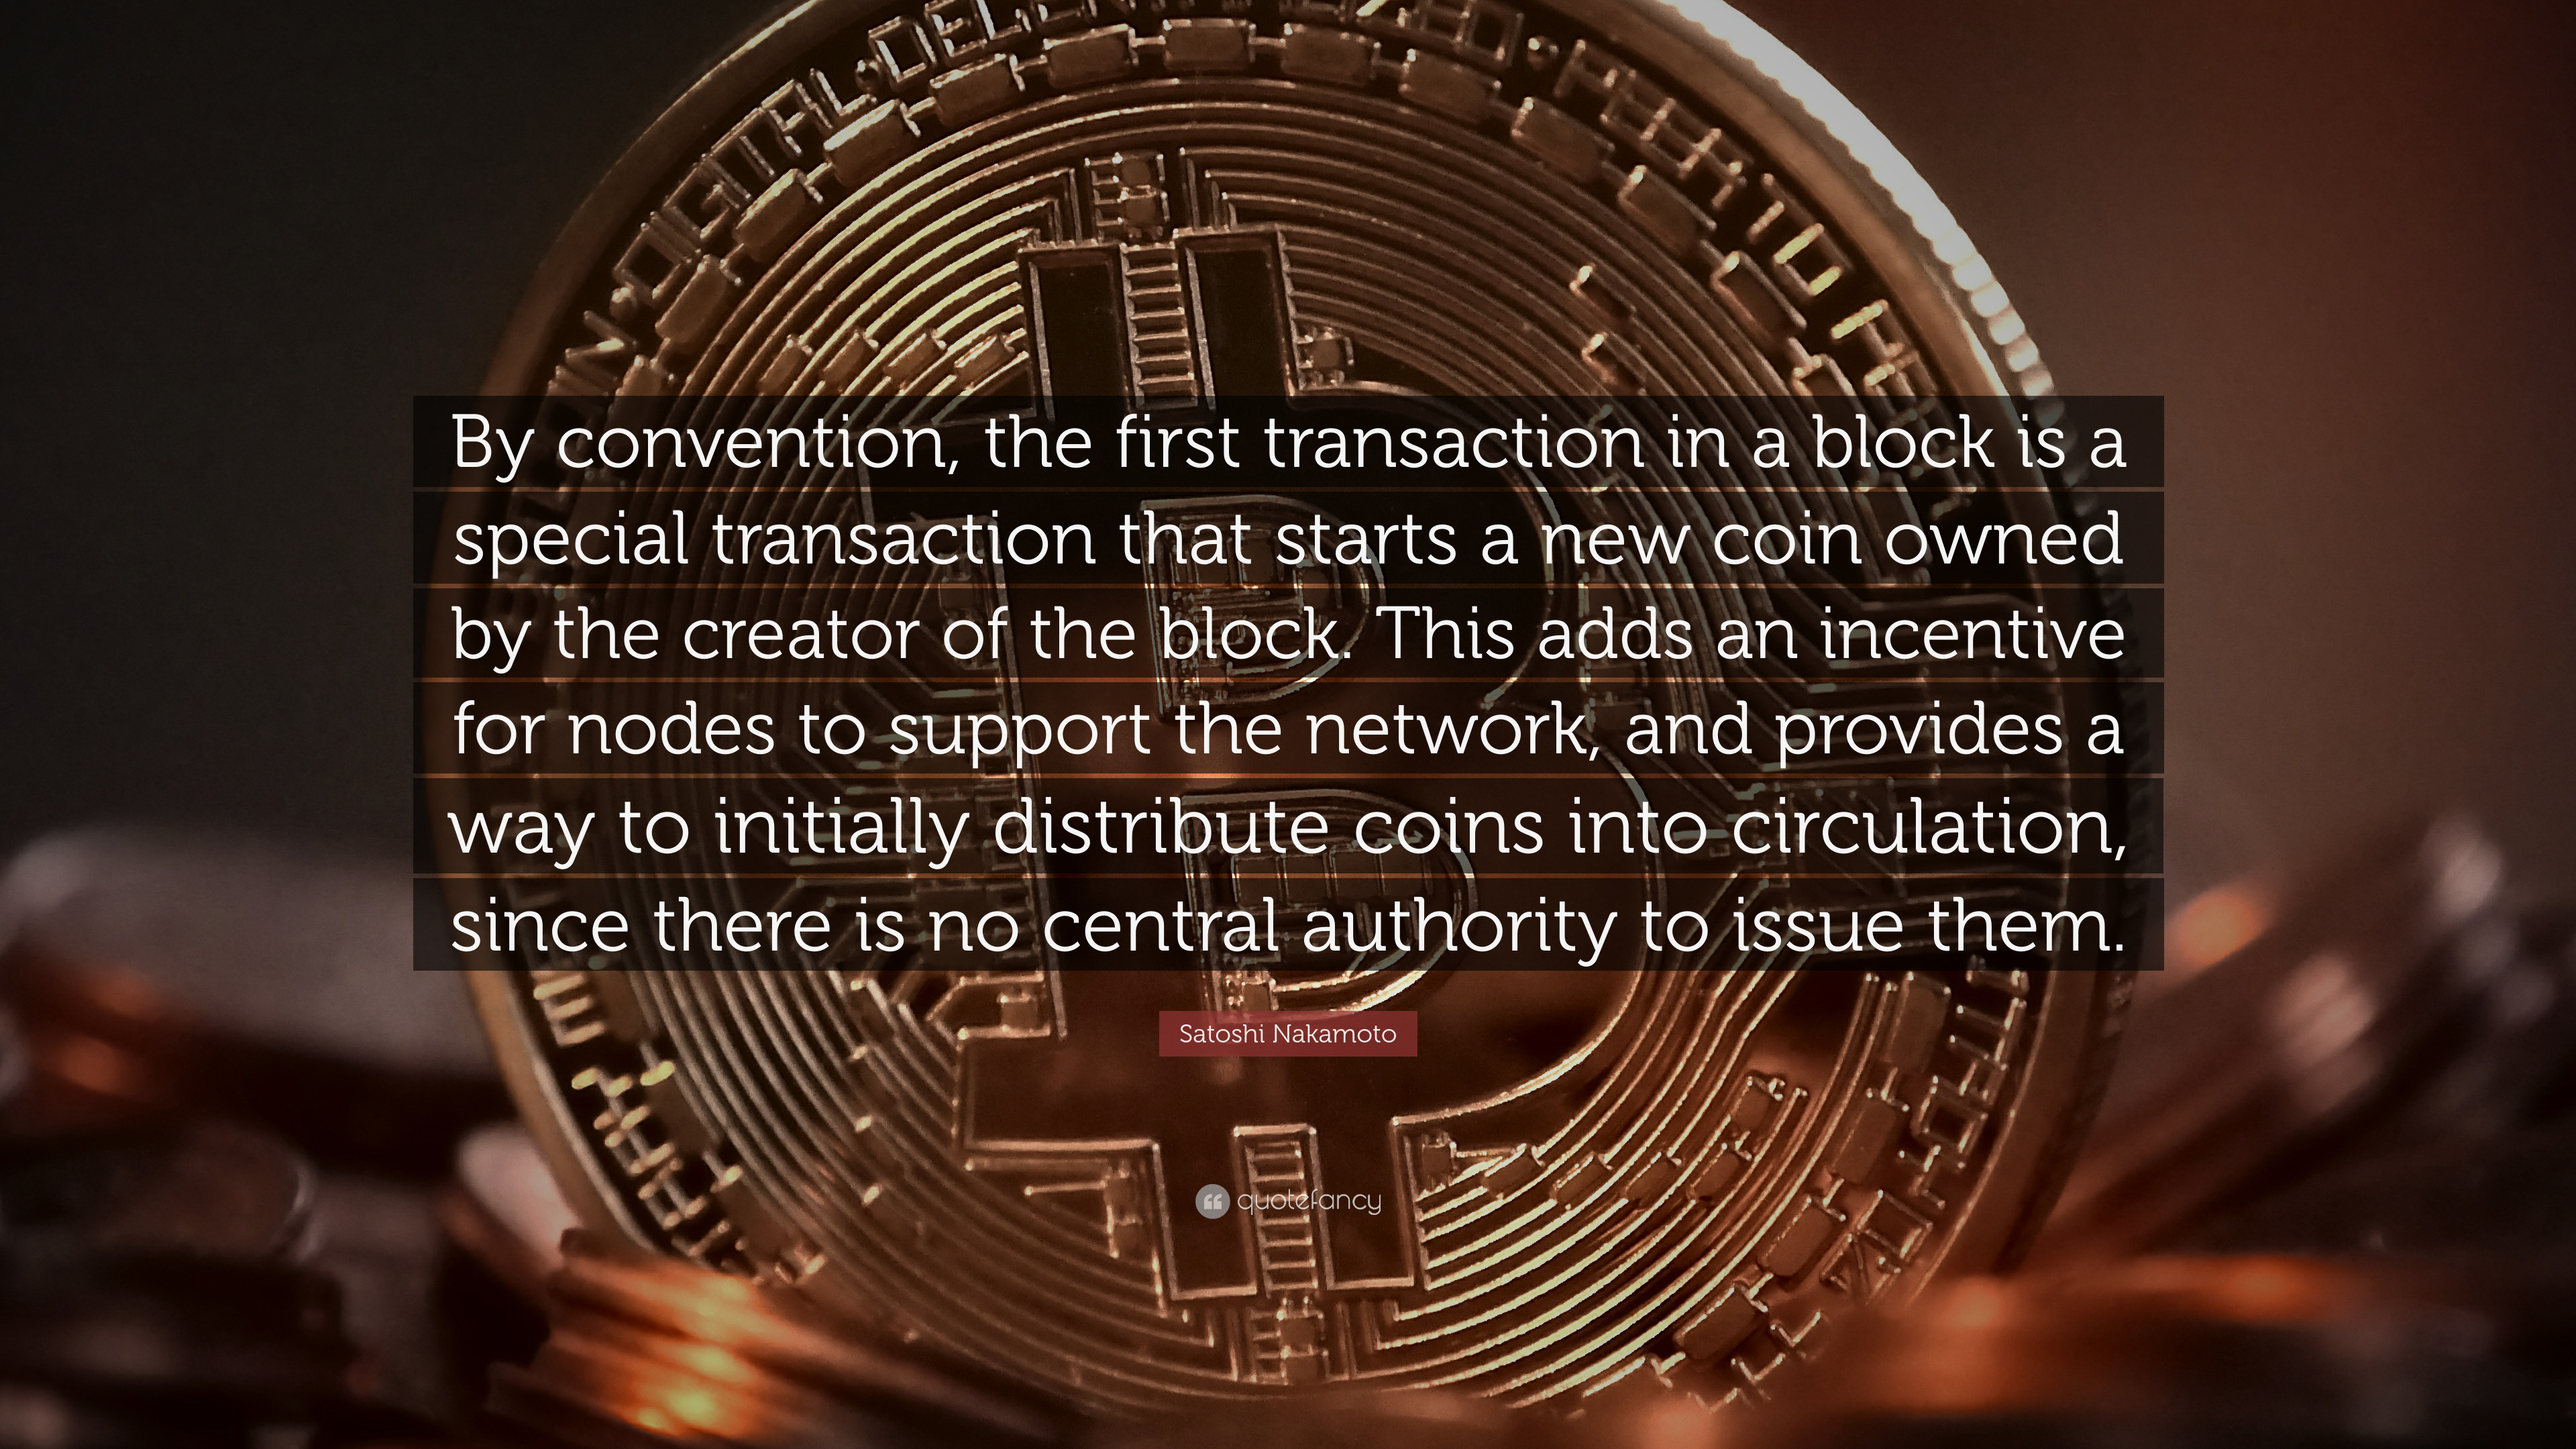 Satoshi Nakamoto Quote: “By convention, the first transaction in a block is a special transaction that starts a new coin owned by the creator”